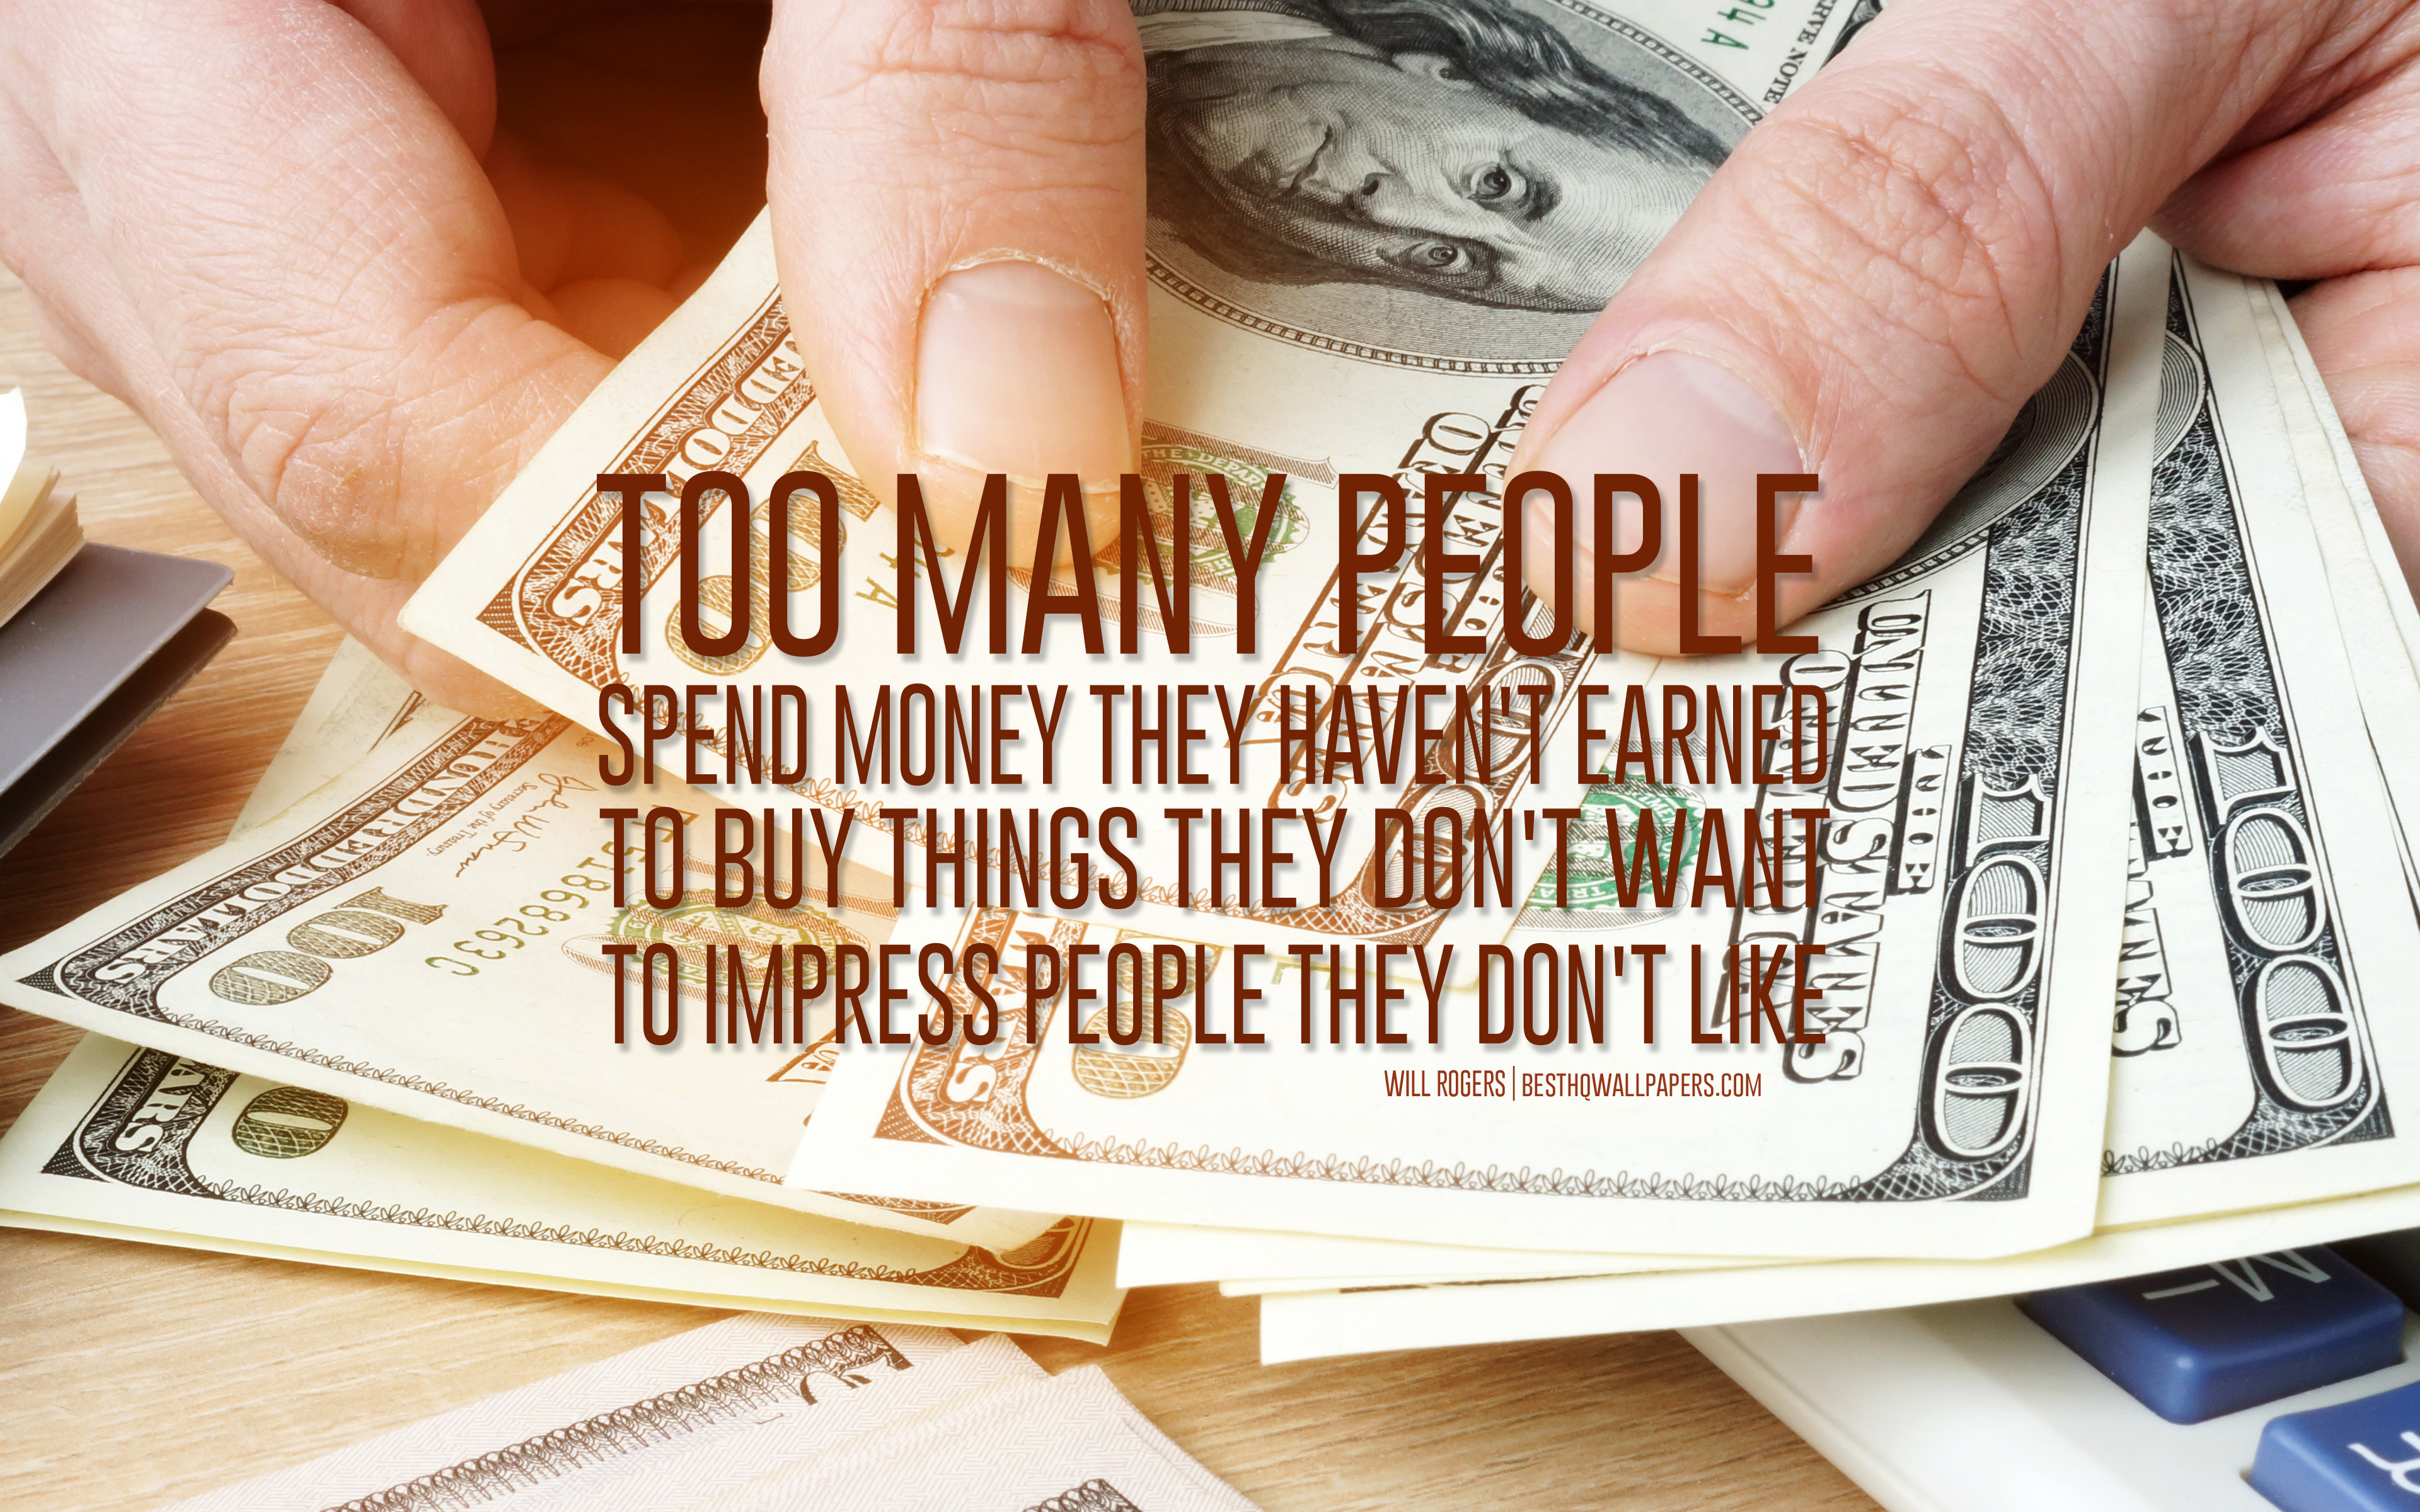 I like spend money. Too much money. Quotations about money. Desktop Wallpapers money quotes. Too many people spend money they earned..to buy things they don't want..to Impress people that they don't like..